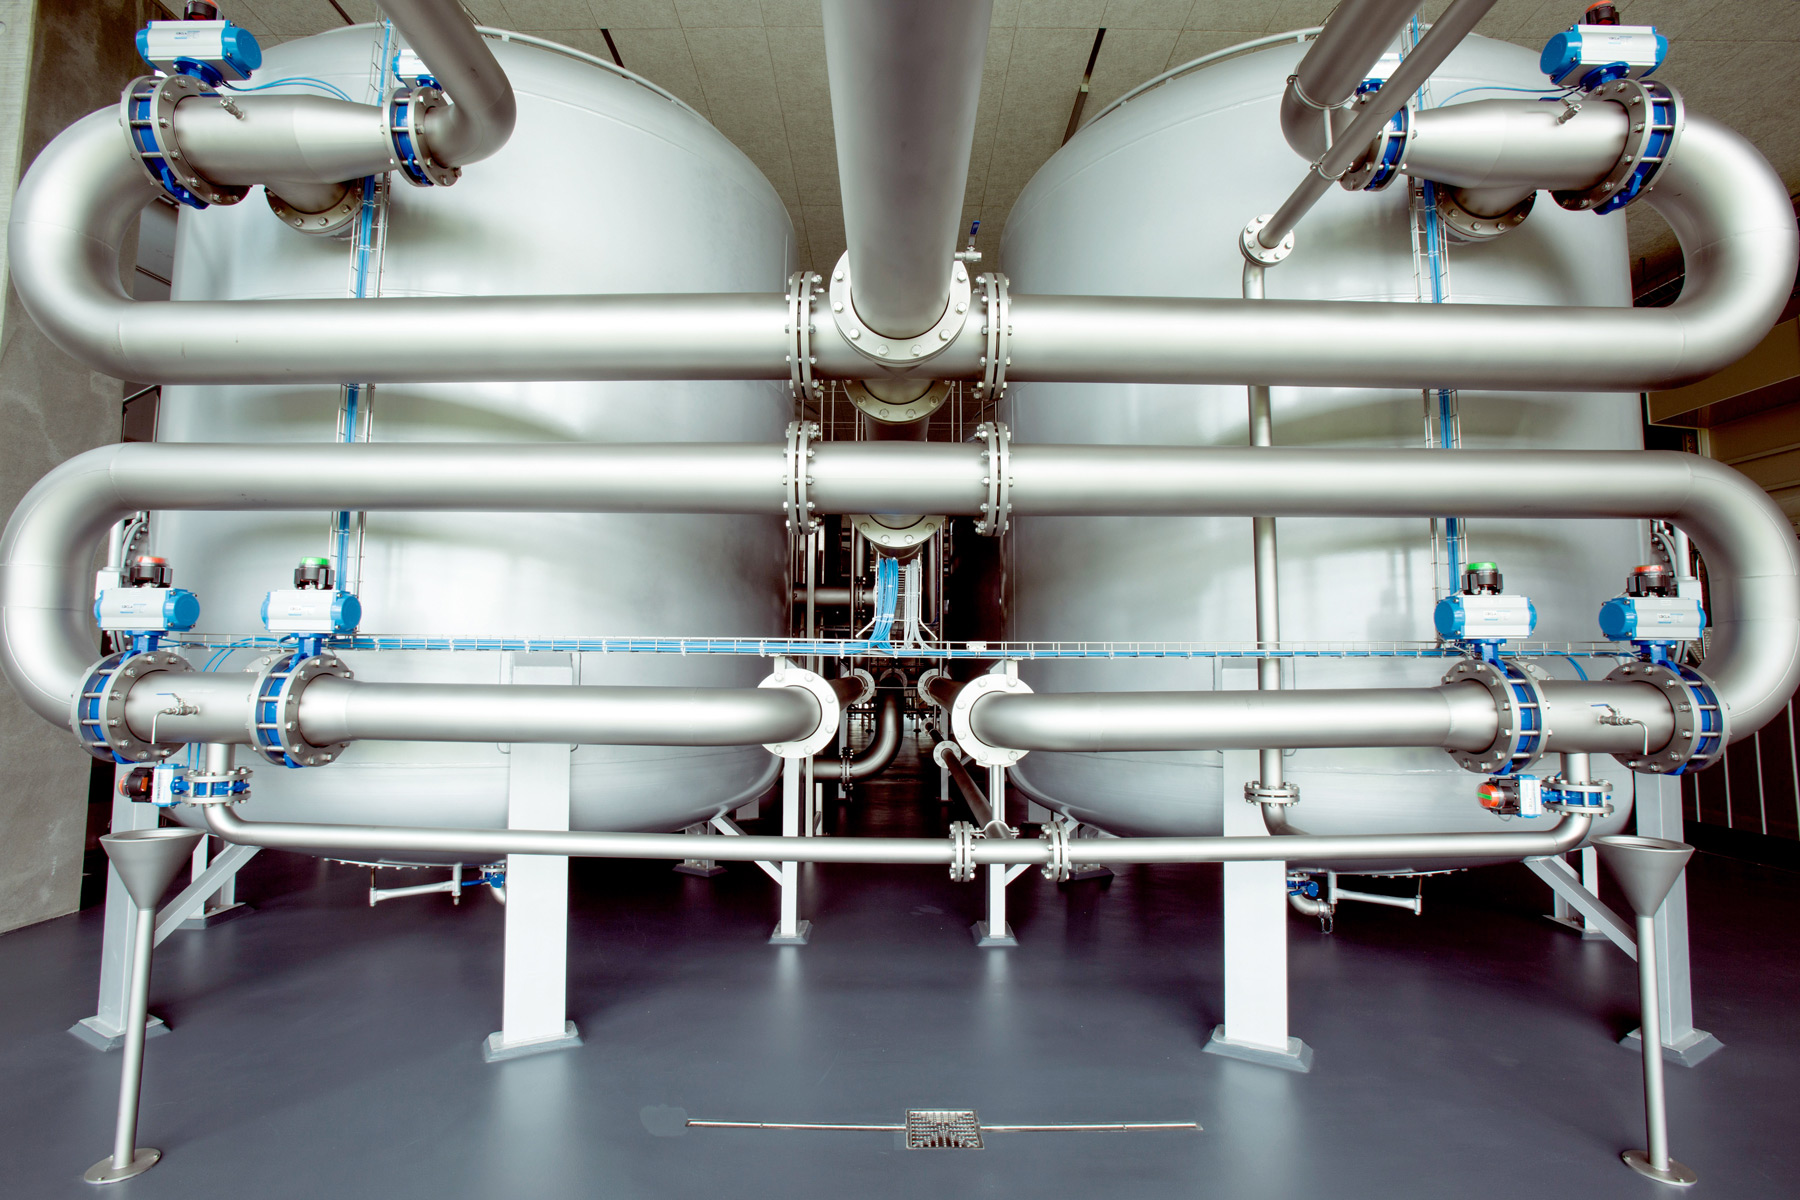 Modern Danish water treatment facility ensuring high-quality tap water